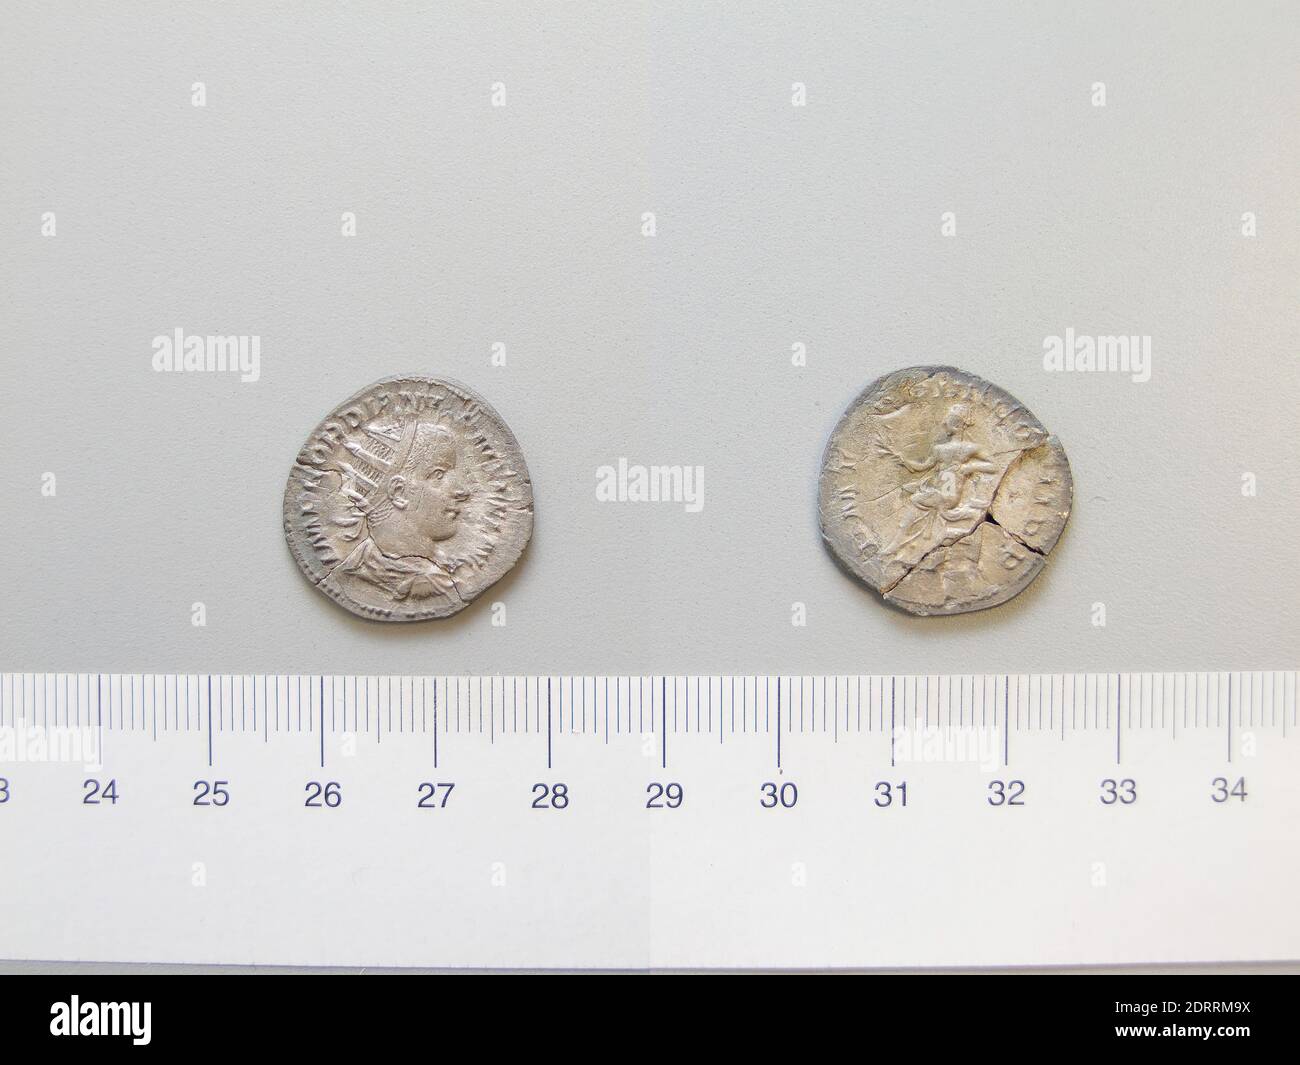 Ruler: Gordian III, Emperor of Rome, 225–244, ruled 238–44, Mint: Rome, Antoninianus of Gordian III, Emperor of Rome from Rome, 241, Silver, 1.54 g, 12:00, 23 mm, Made in Rome, Italy, Roman, 3rd century, Numismatics Stock Photo